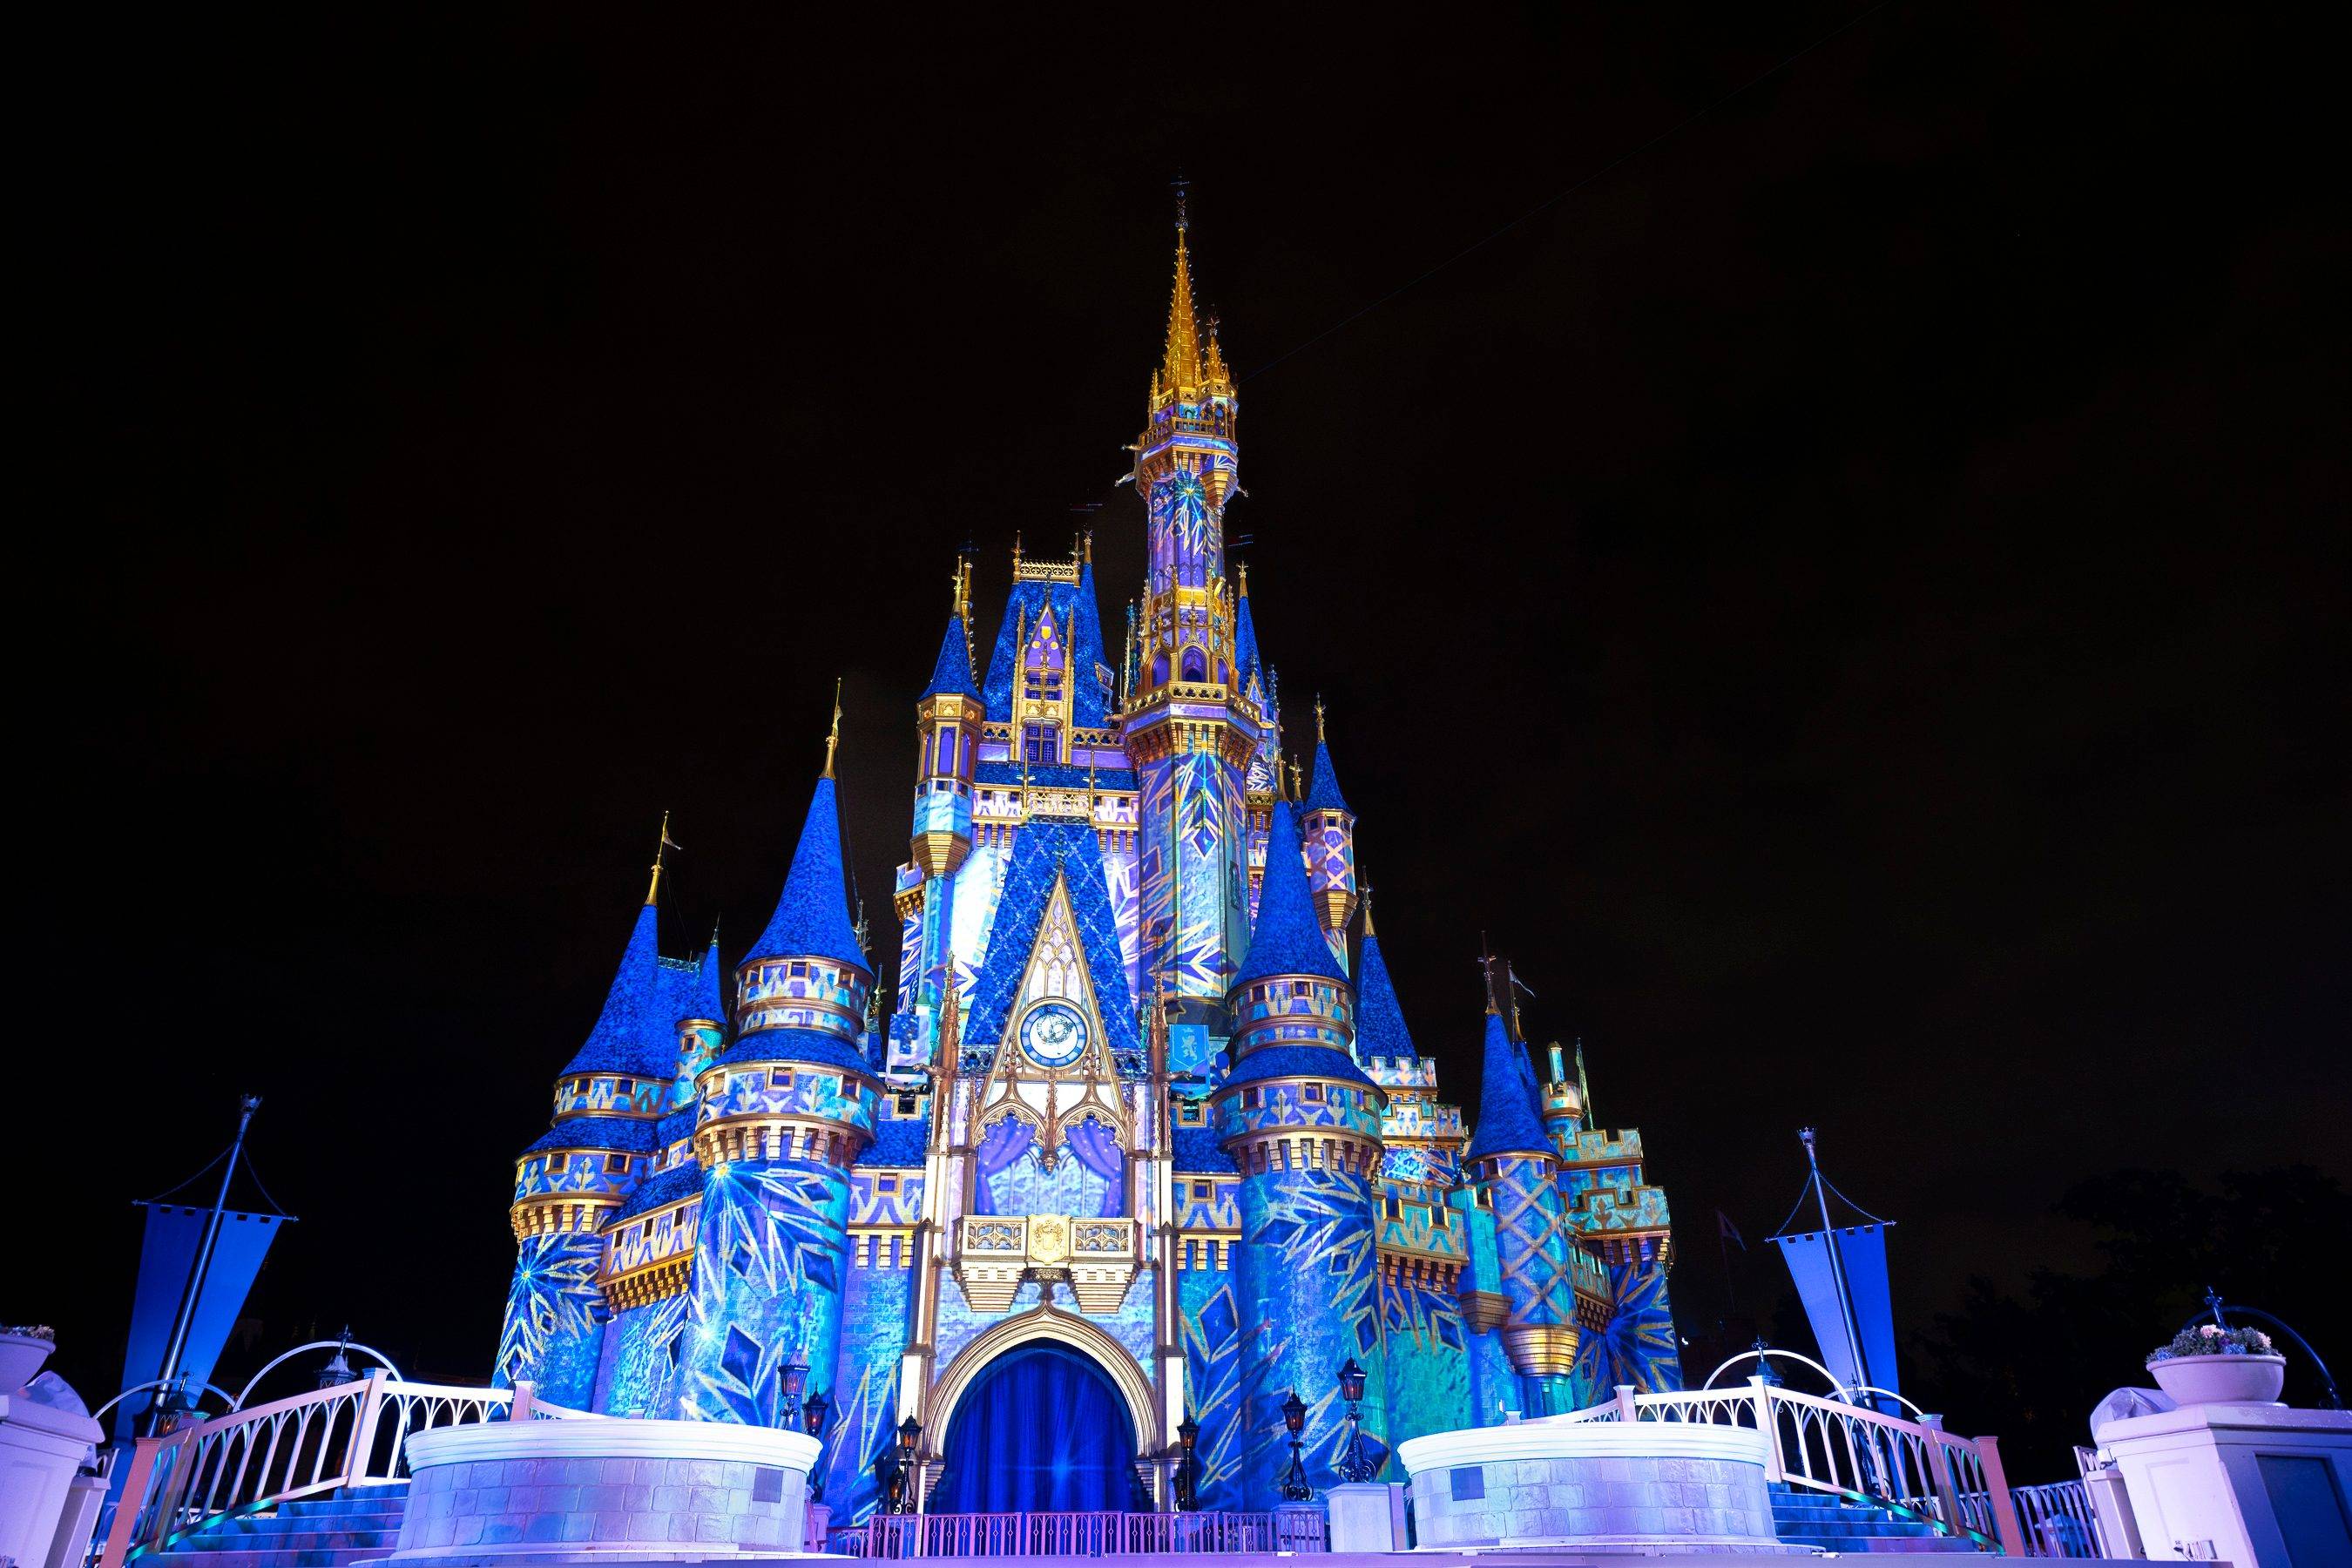 With Wish, has Disney lost its magic touch?